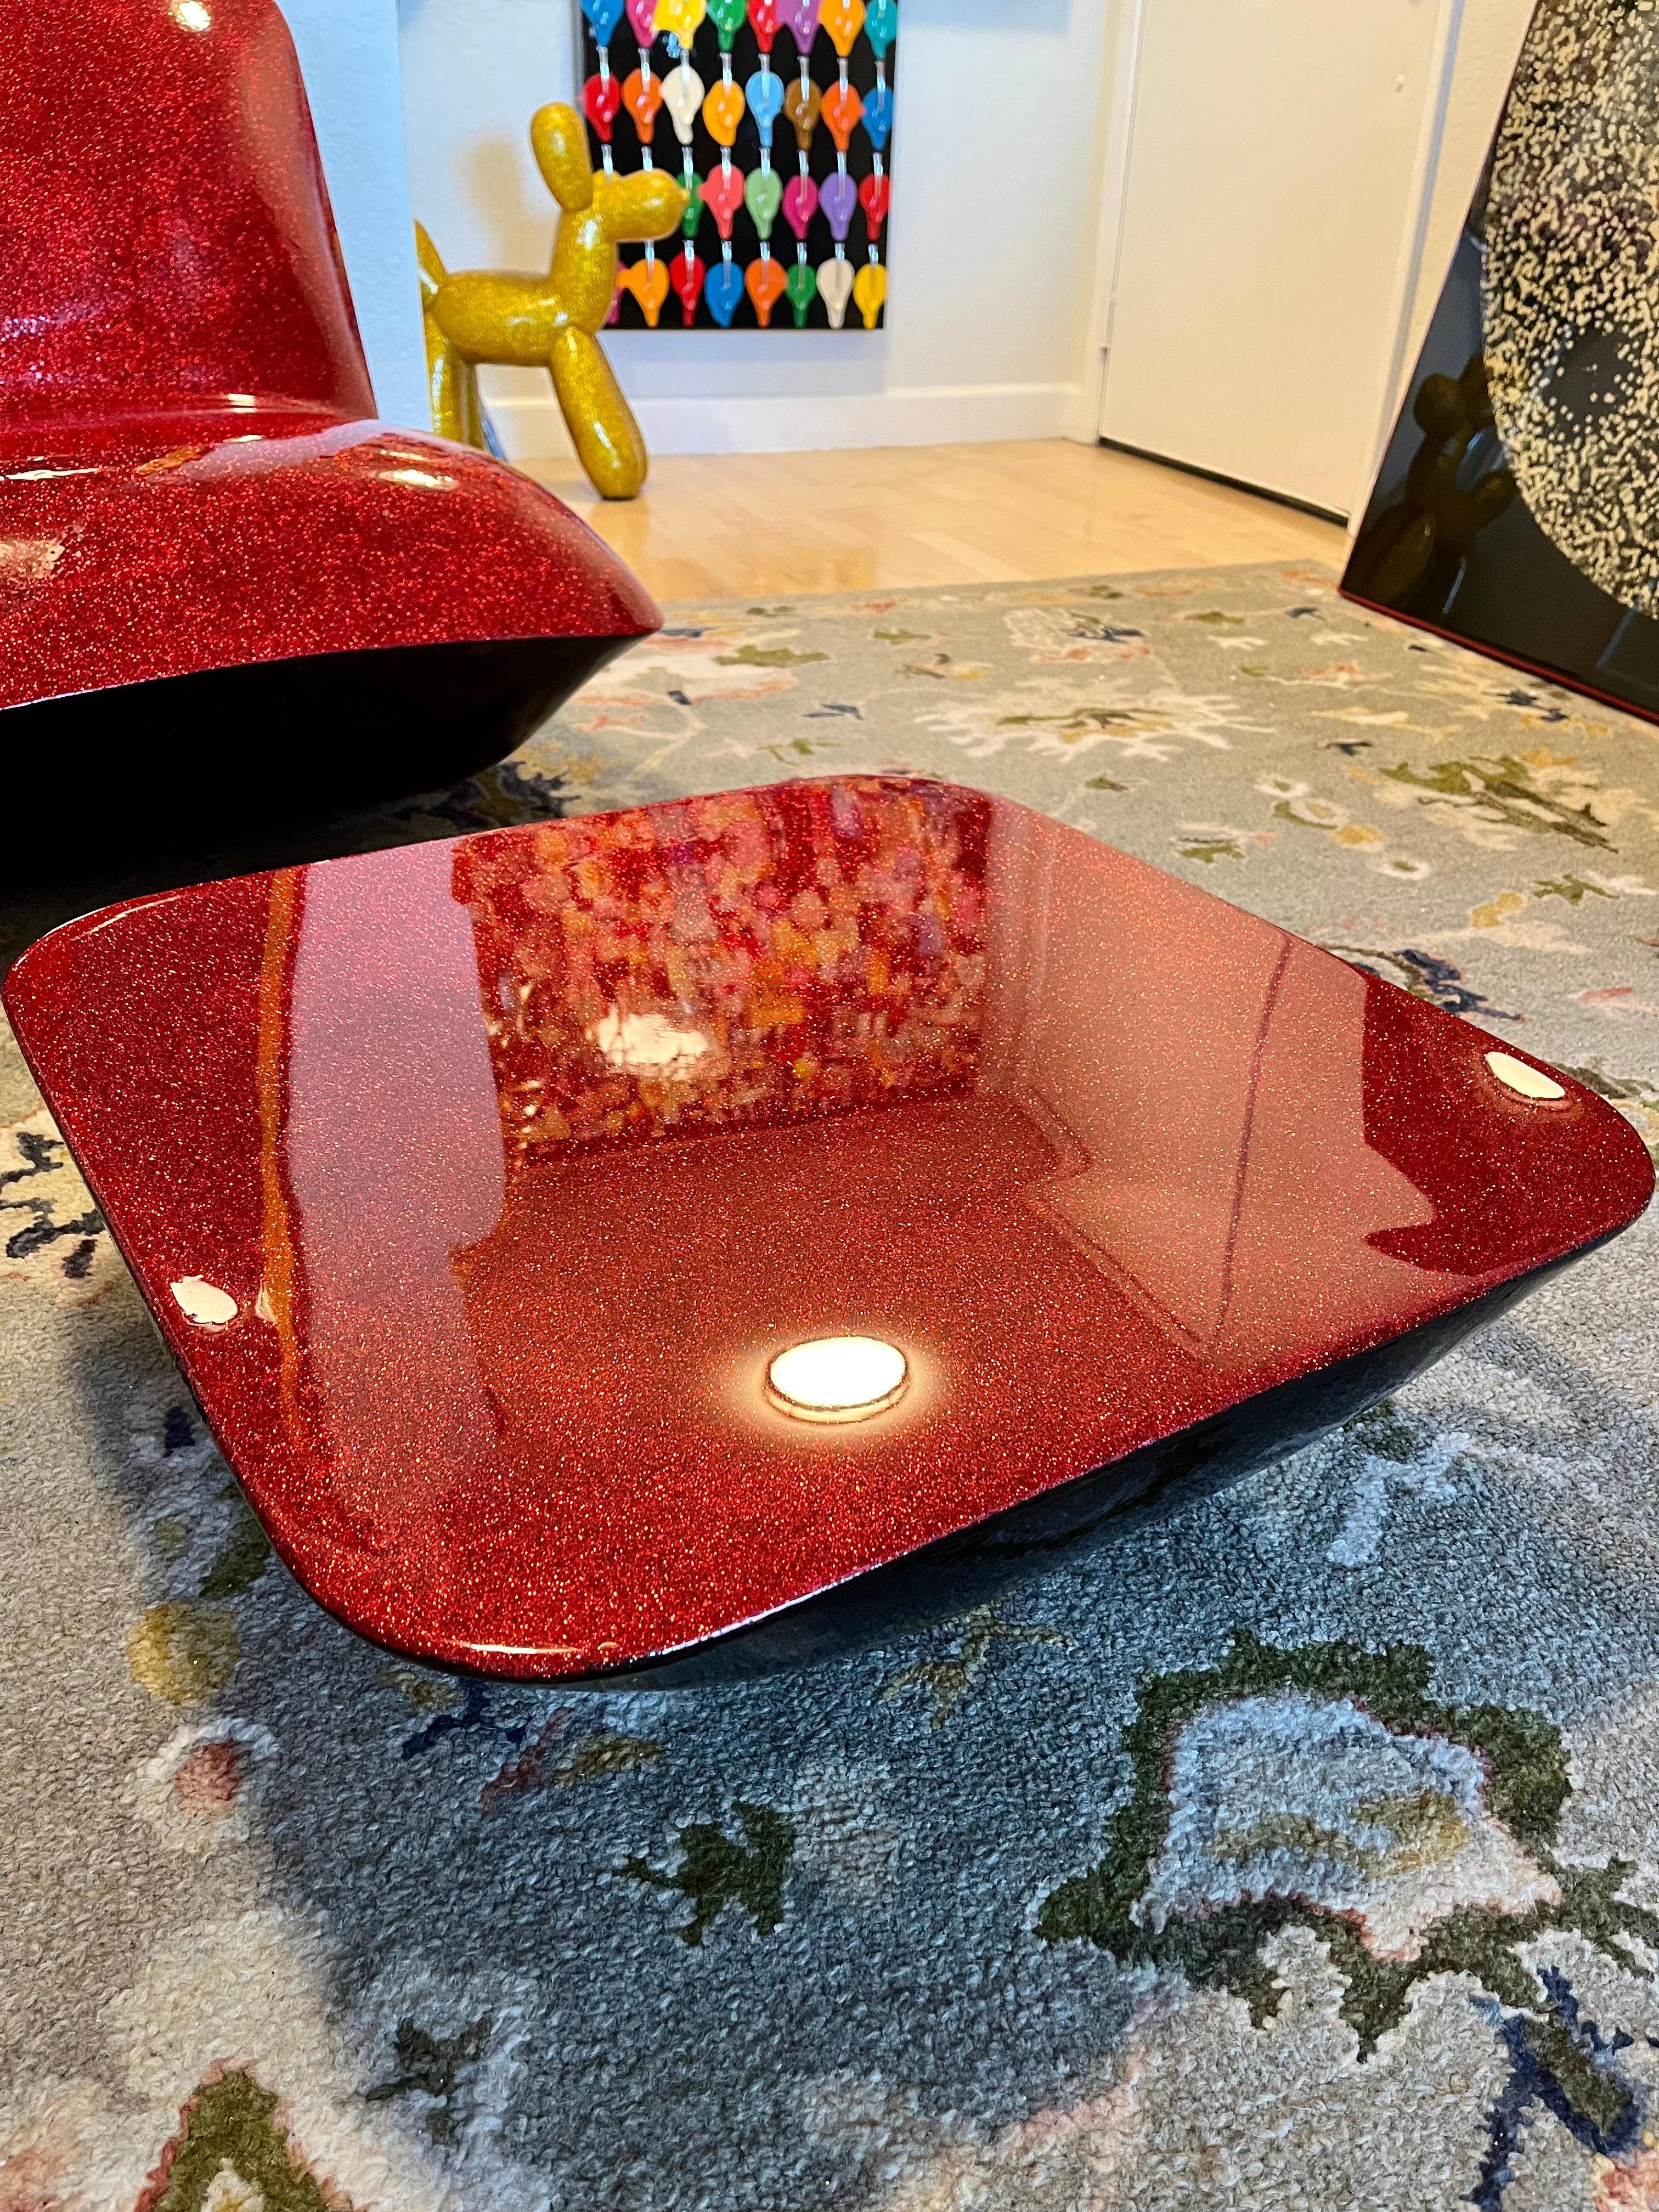 HARD CANDY GLITTER CHAIR WITH OTTOMAN I (One Of a Kind Functional Art) 6